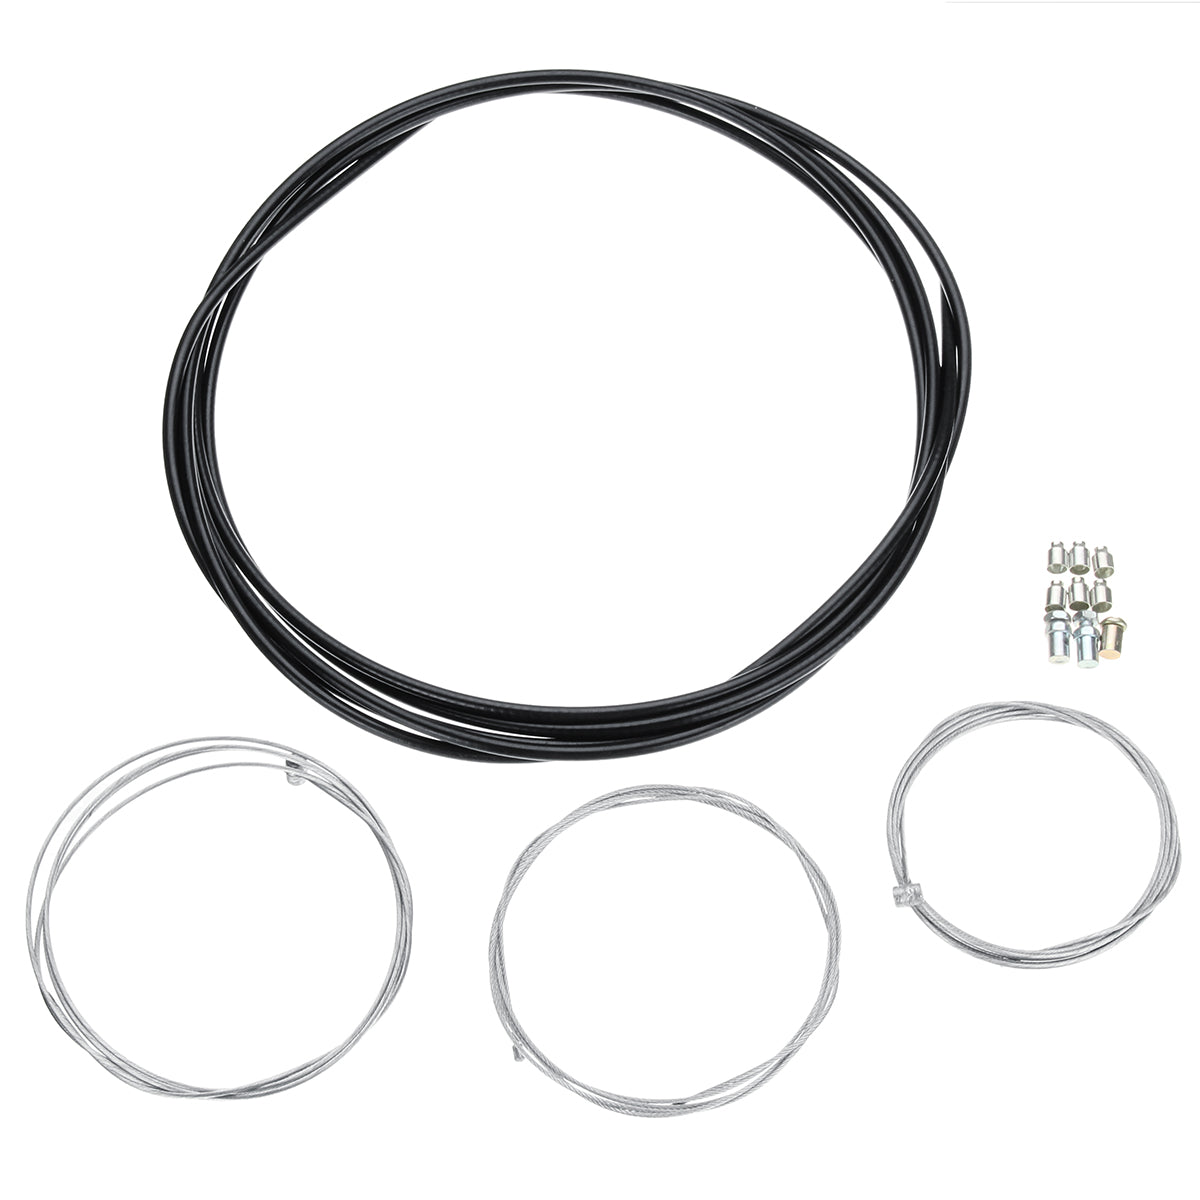 Dark Slate Gray Universal Motorcycle Clutch Brake Throttle Cable Set Replacement Kit